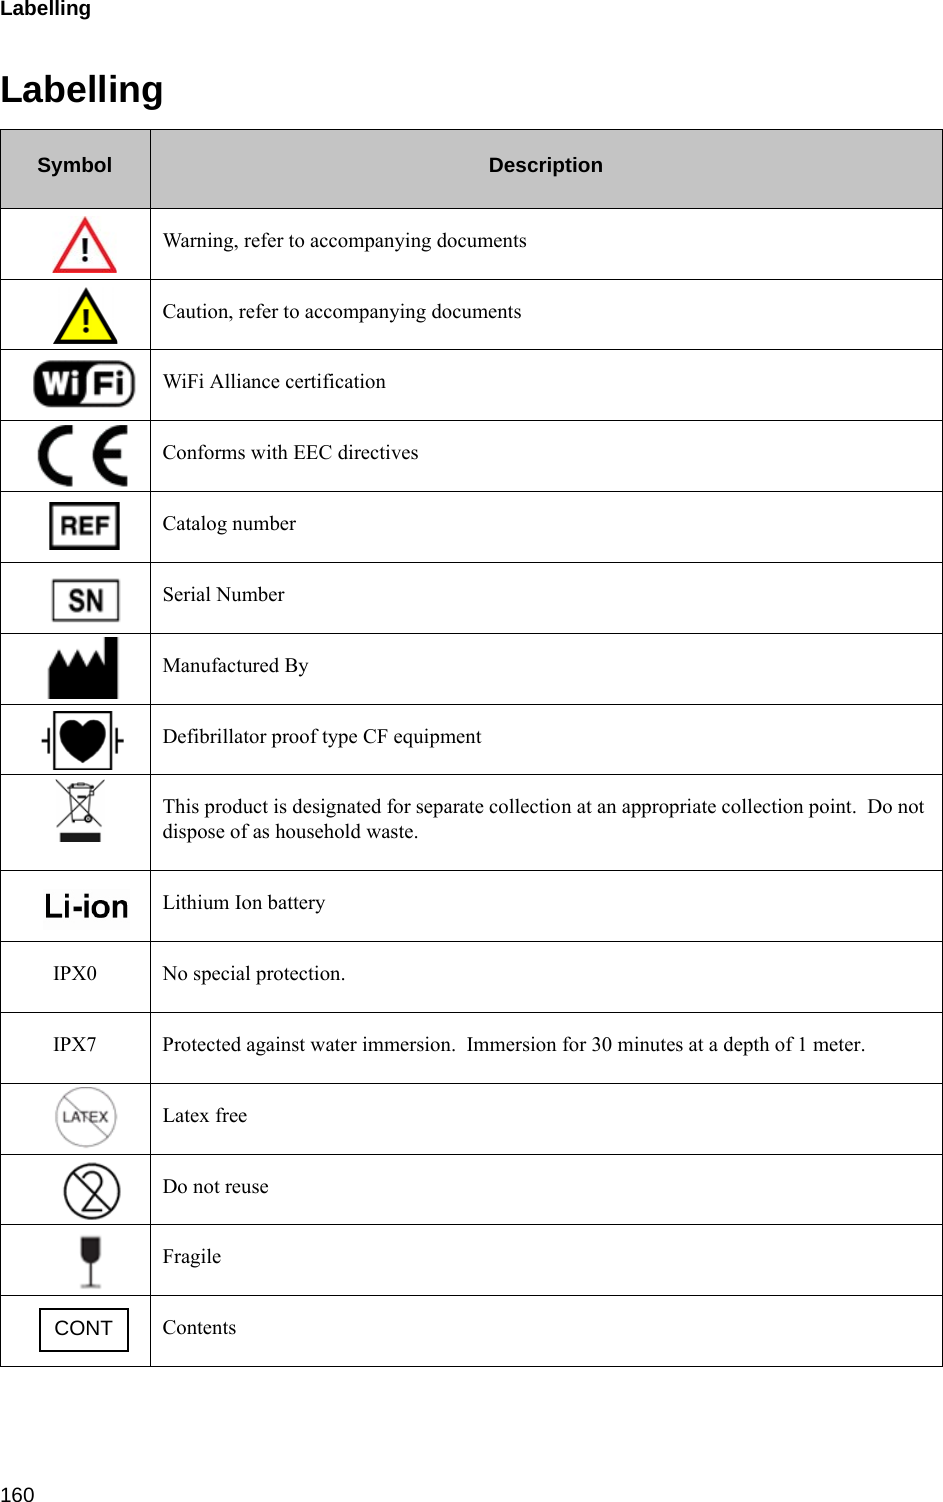 Labelling 160LabellingSymbol DescriptionWarning, refer to accompanying documentsCaution, refer to accompanying documentsWiFi Alliance certificationConforms with EEC directivesCatalog numberSerial NumberManufactured ByDefibrillator proof type CF equipmentThis product is designated for separate collection at an appropriate collection point.  Do not dispose of as household waste.Lithium Ion batteryIPX0 No special protection.IPX7 Protected against water immersion.  Immersion for 30 minutes at a depth of 1 meter.Latex freeDo not reuseFragileContentsCONT